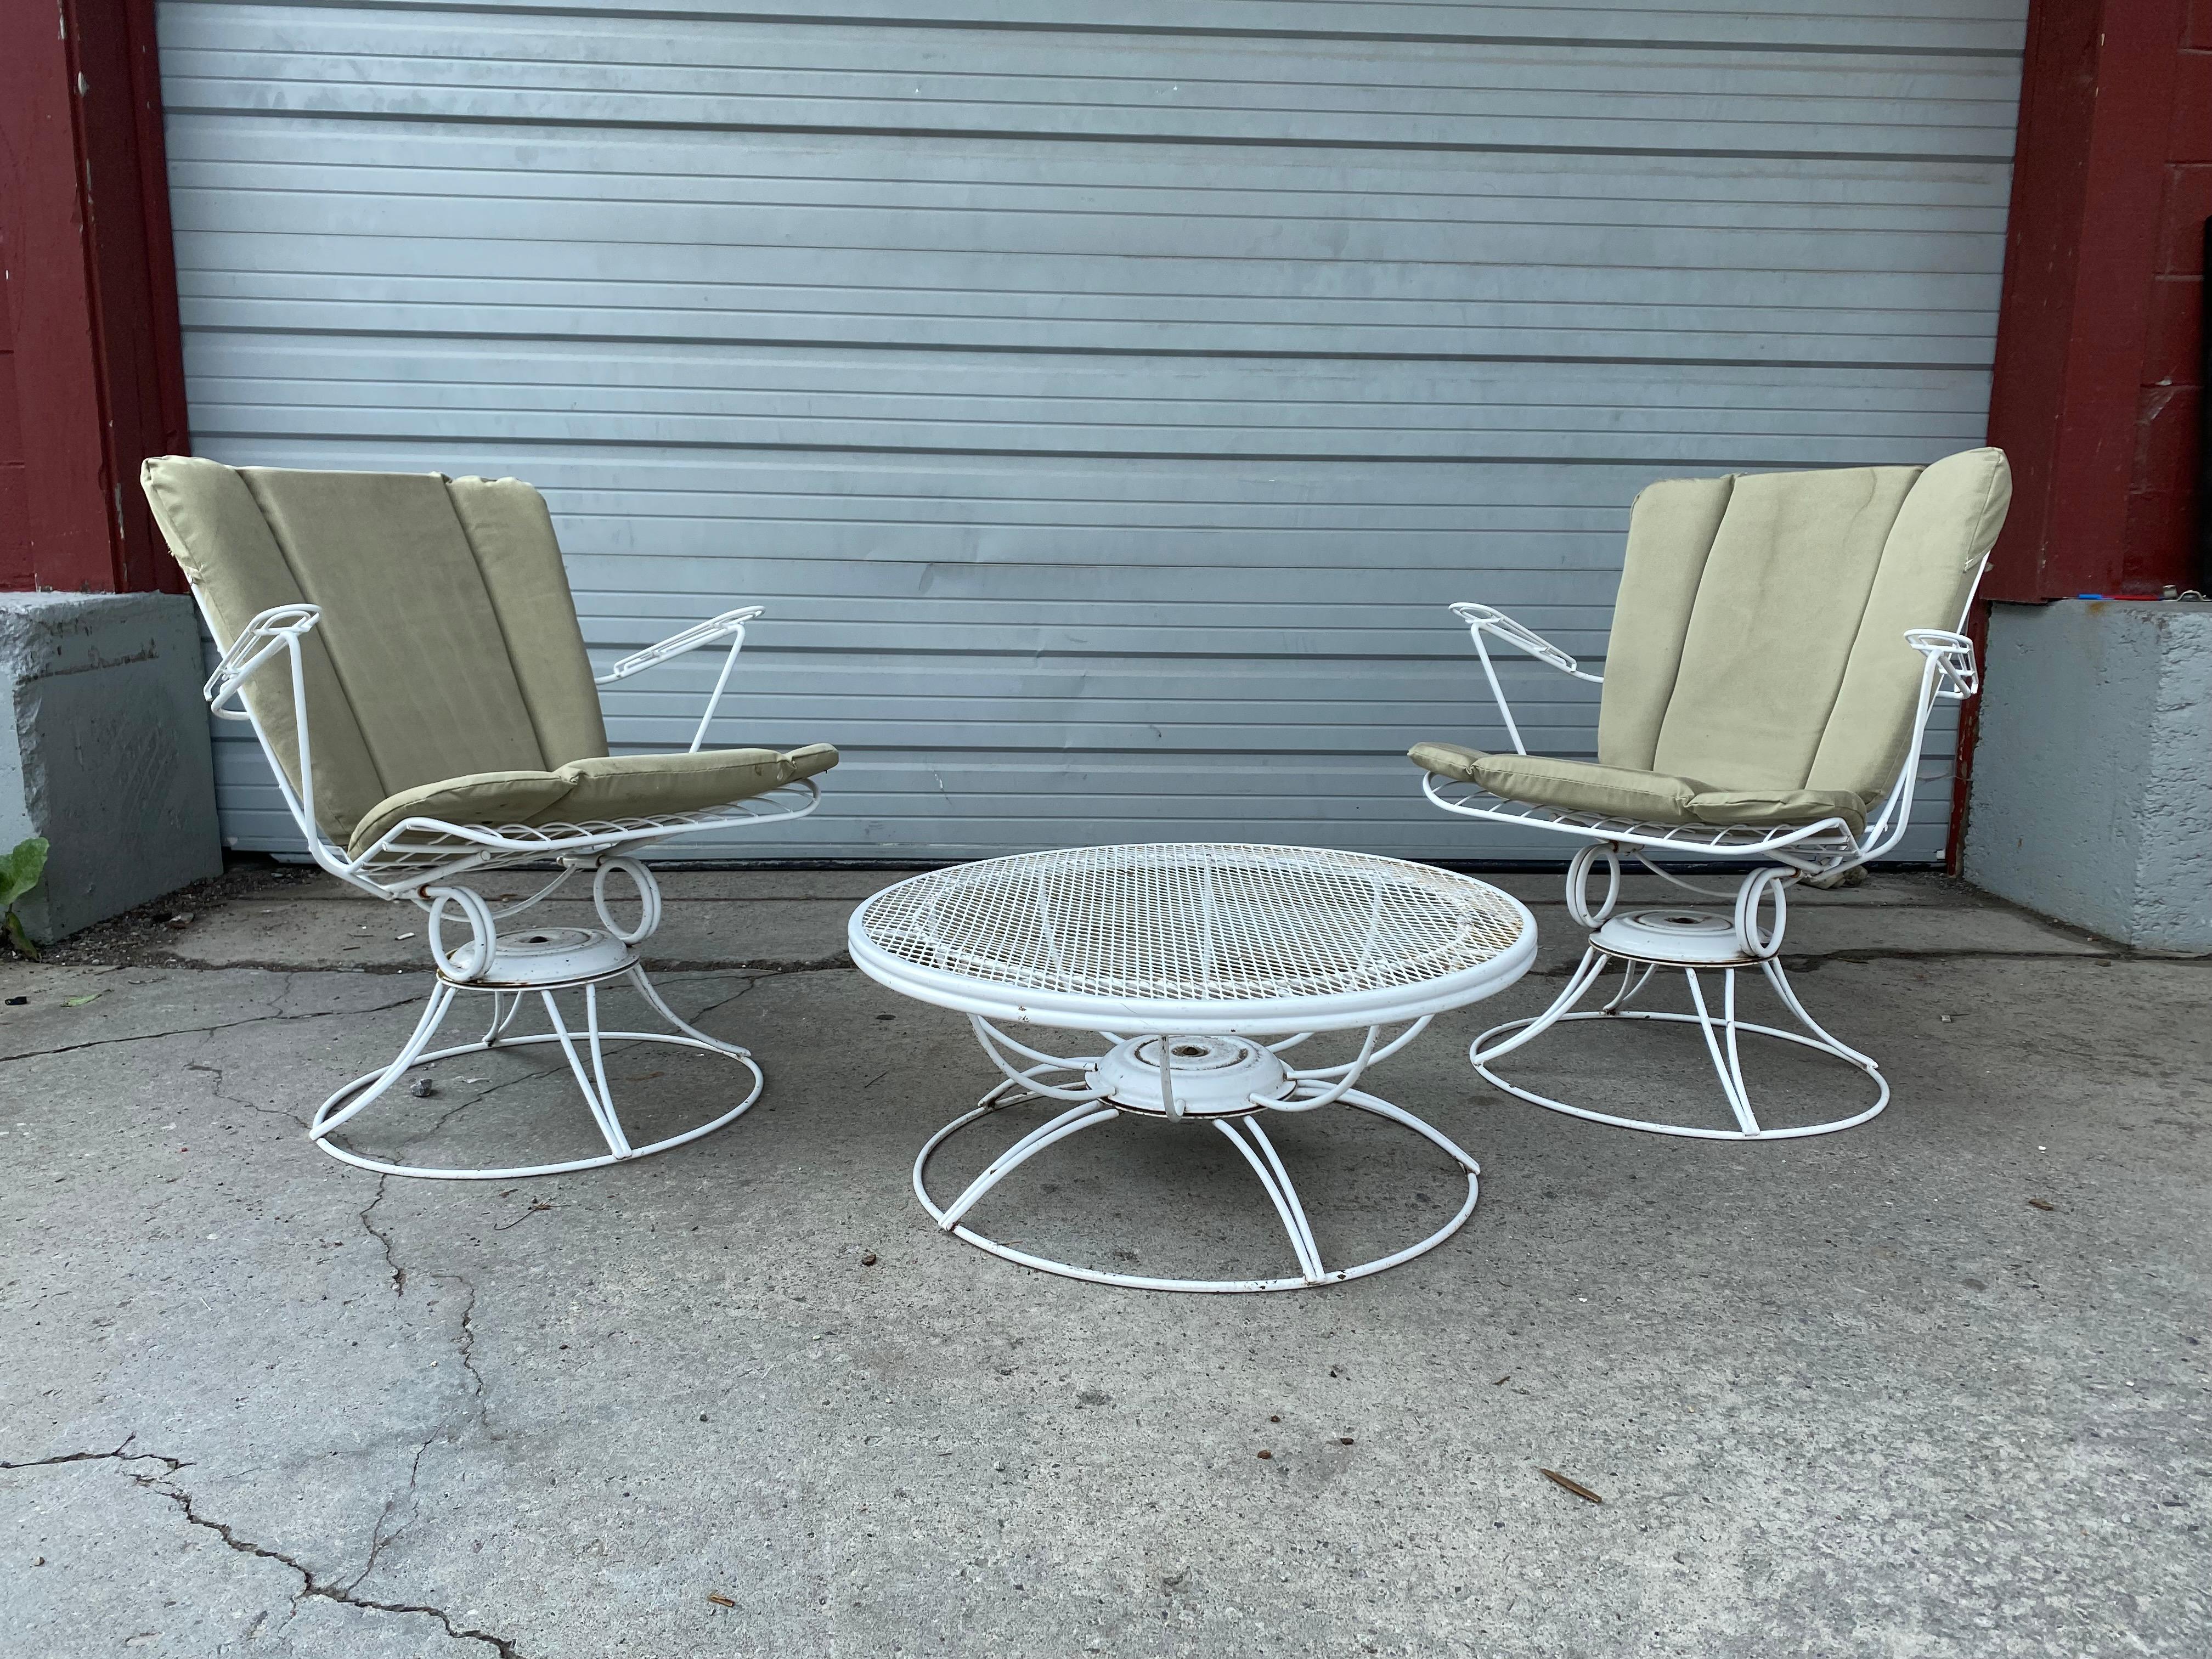 Offered is a pair of vintage Mid-Century Modern iron swivel/rocker patio lounge chairs (model 36) and seldom seen lazy Suzan coffee or cocktail table made by Homecrest by Bottemiller, circa 1968. These chairs swivel and rock, and retain original